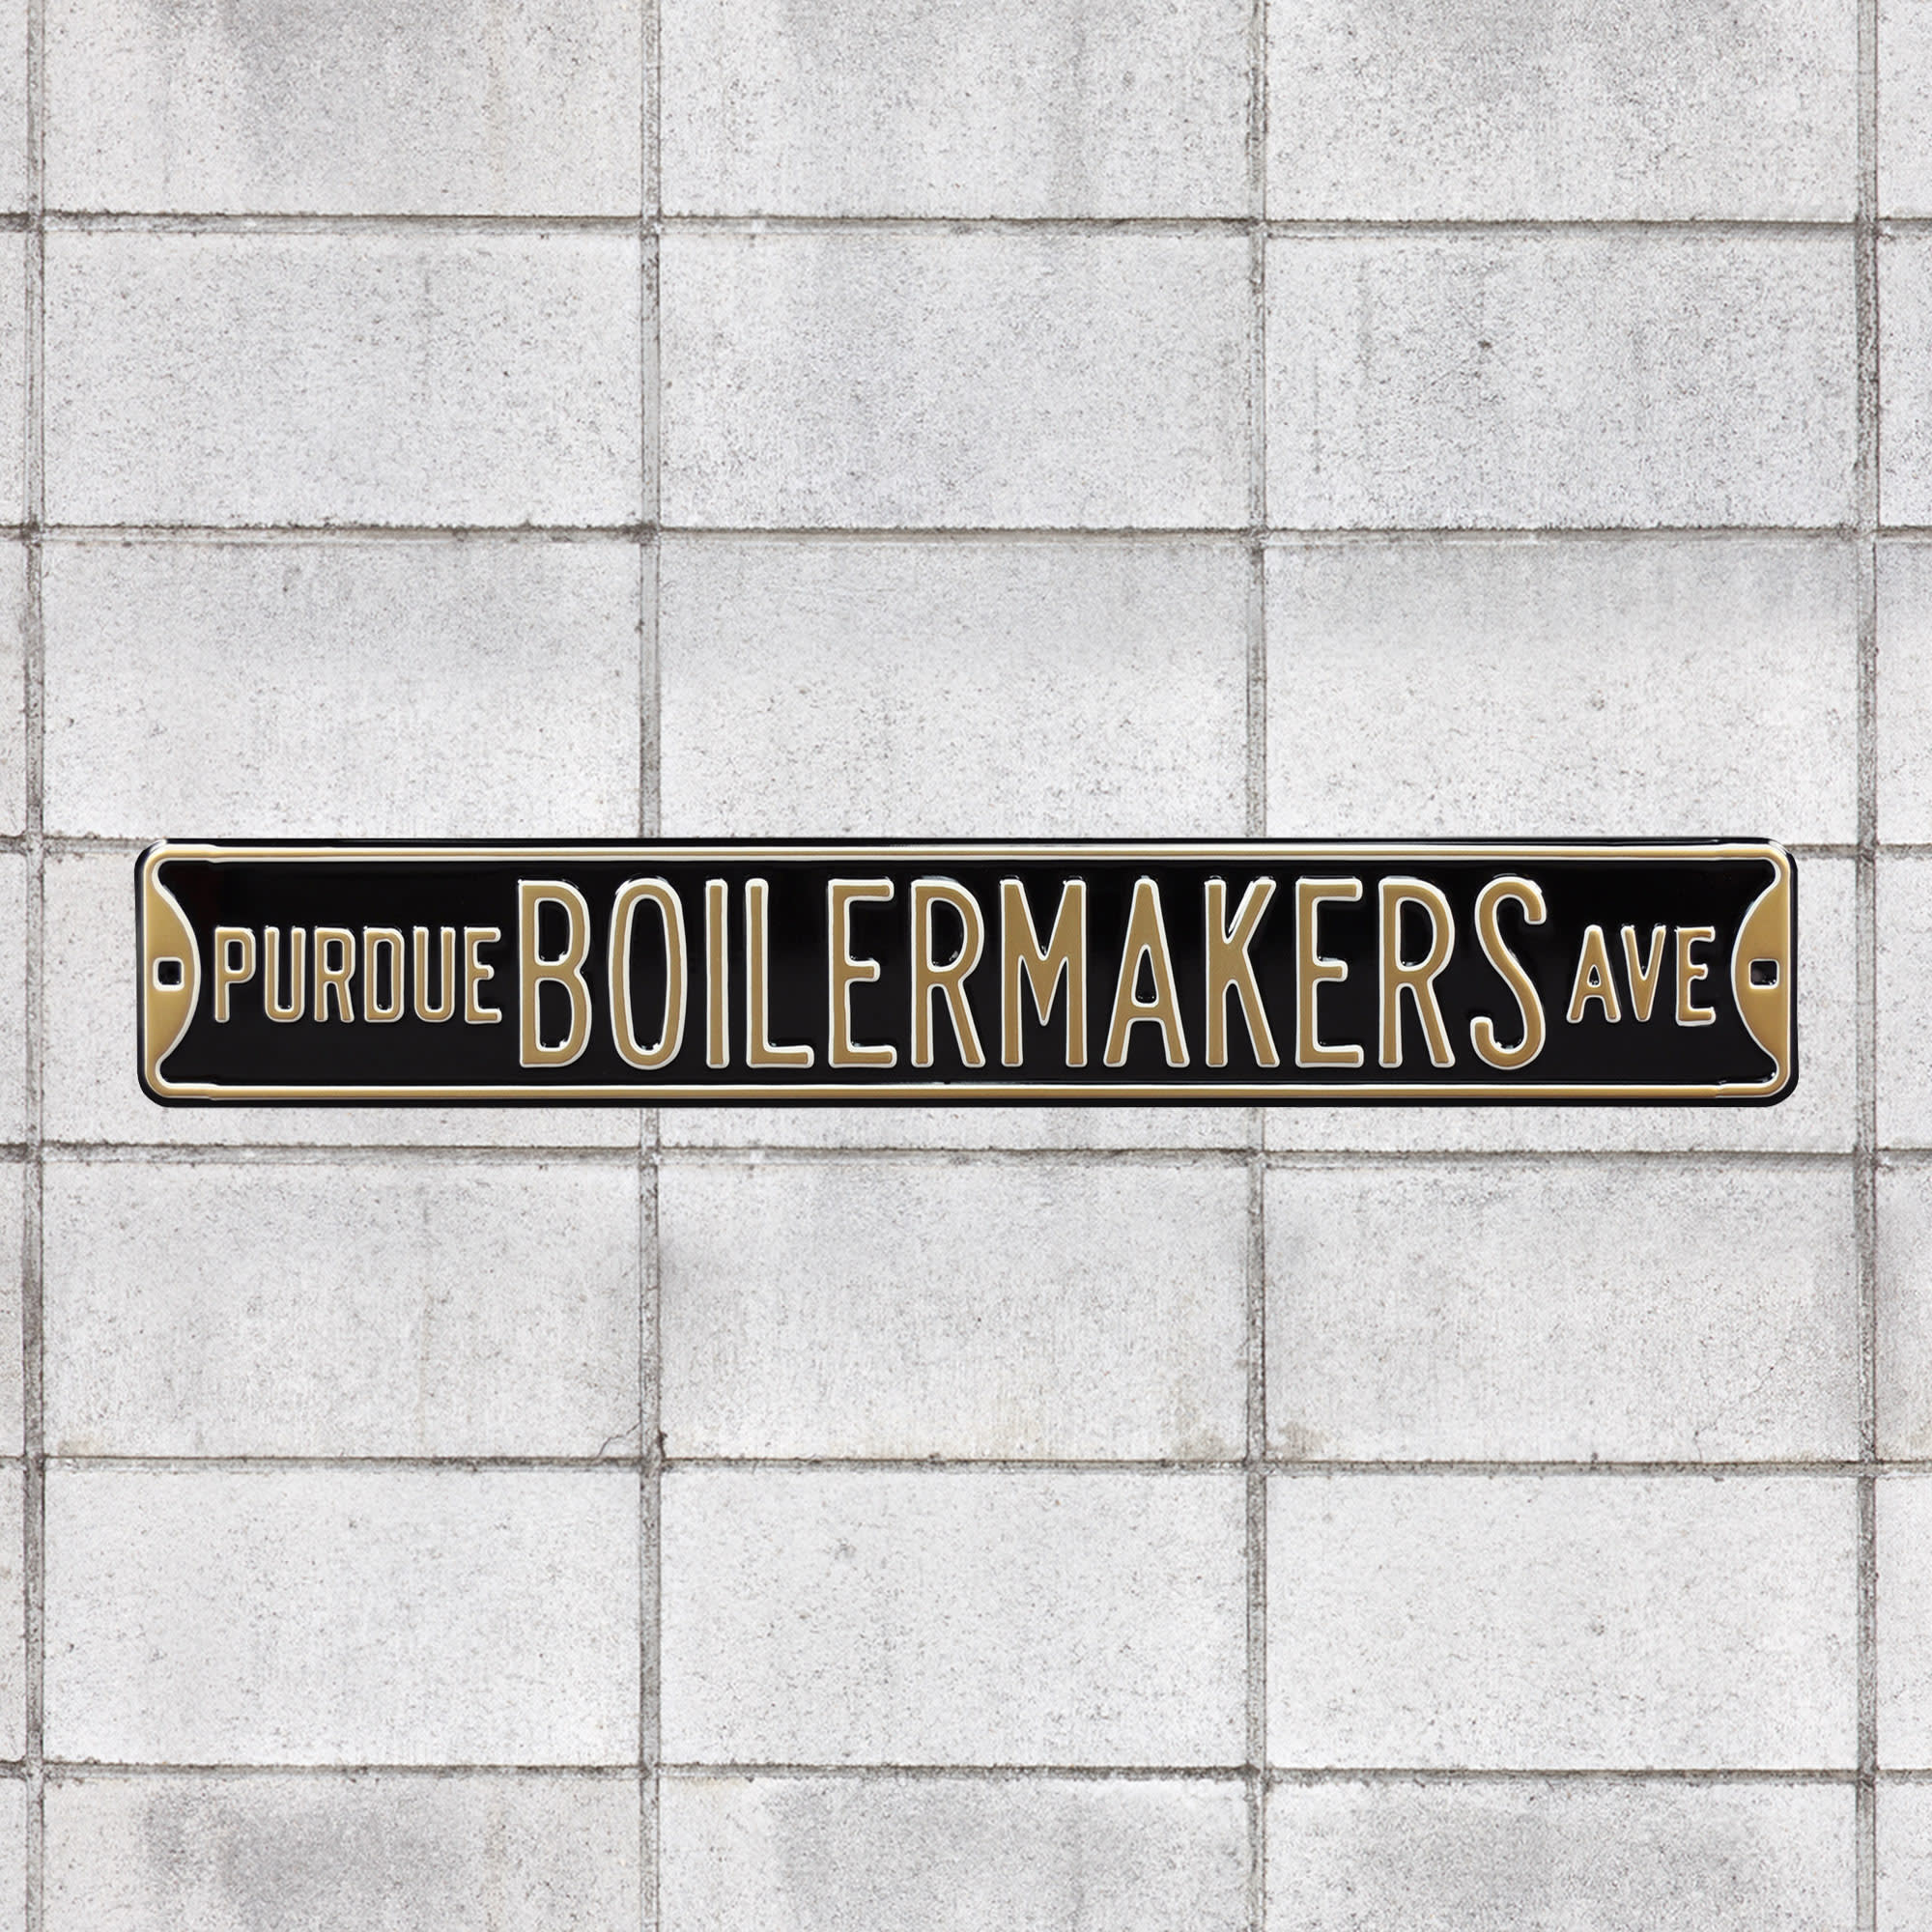 Purdue Boilermakers: Purdue Boilermakers Avenue - Officially Licensed Metal Street Sign 36.0"W x 6.0"H by Fathead | 100% Steel